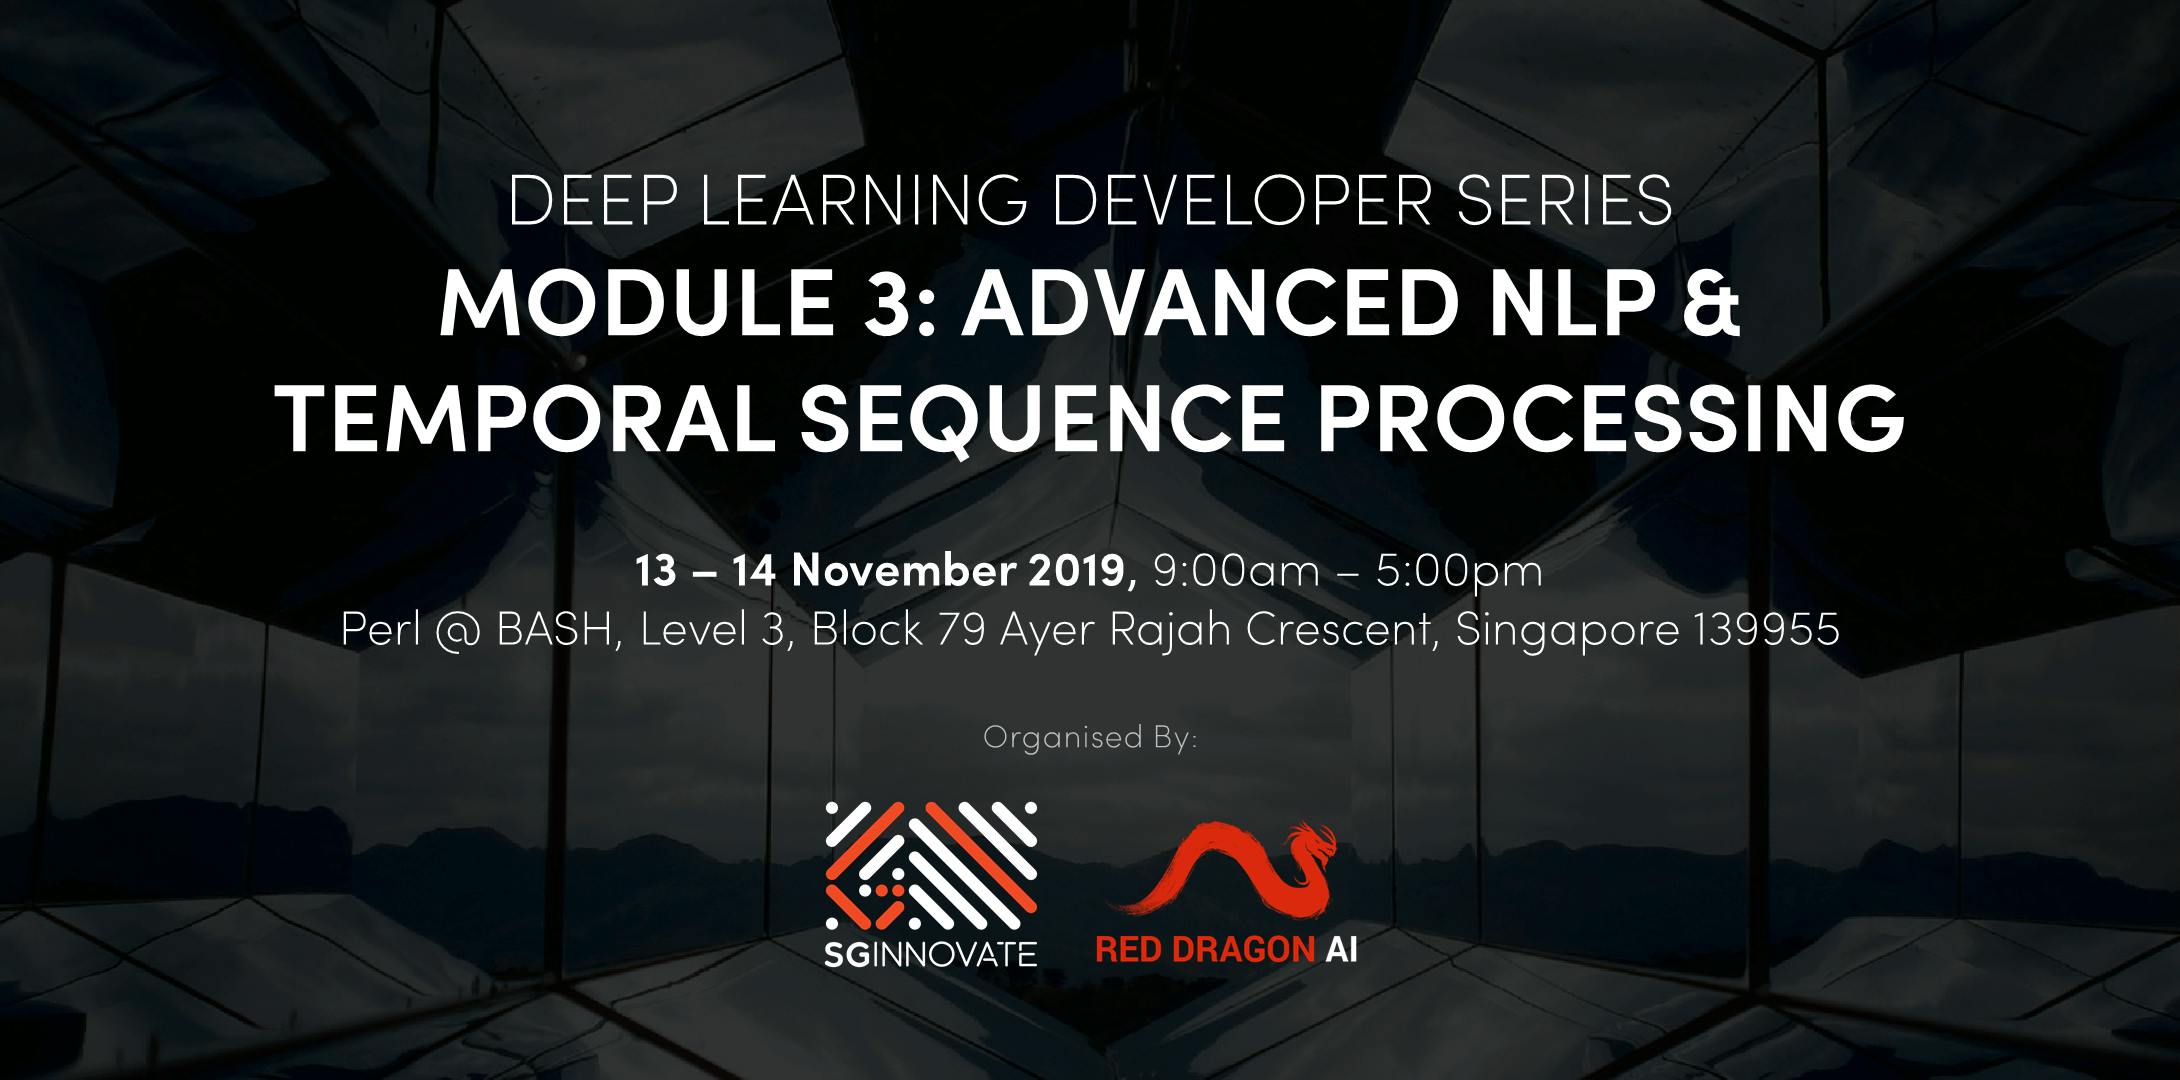 Advanced NLP and Temporal Sequence Processing (13 – 14 November 2019)